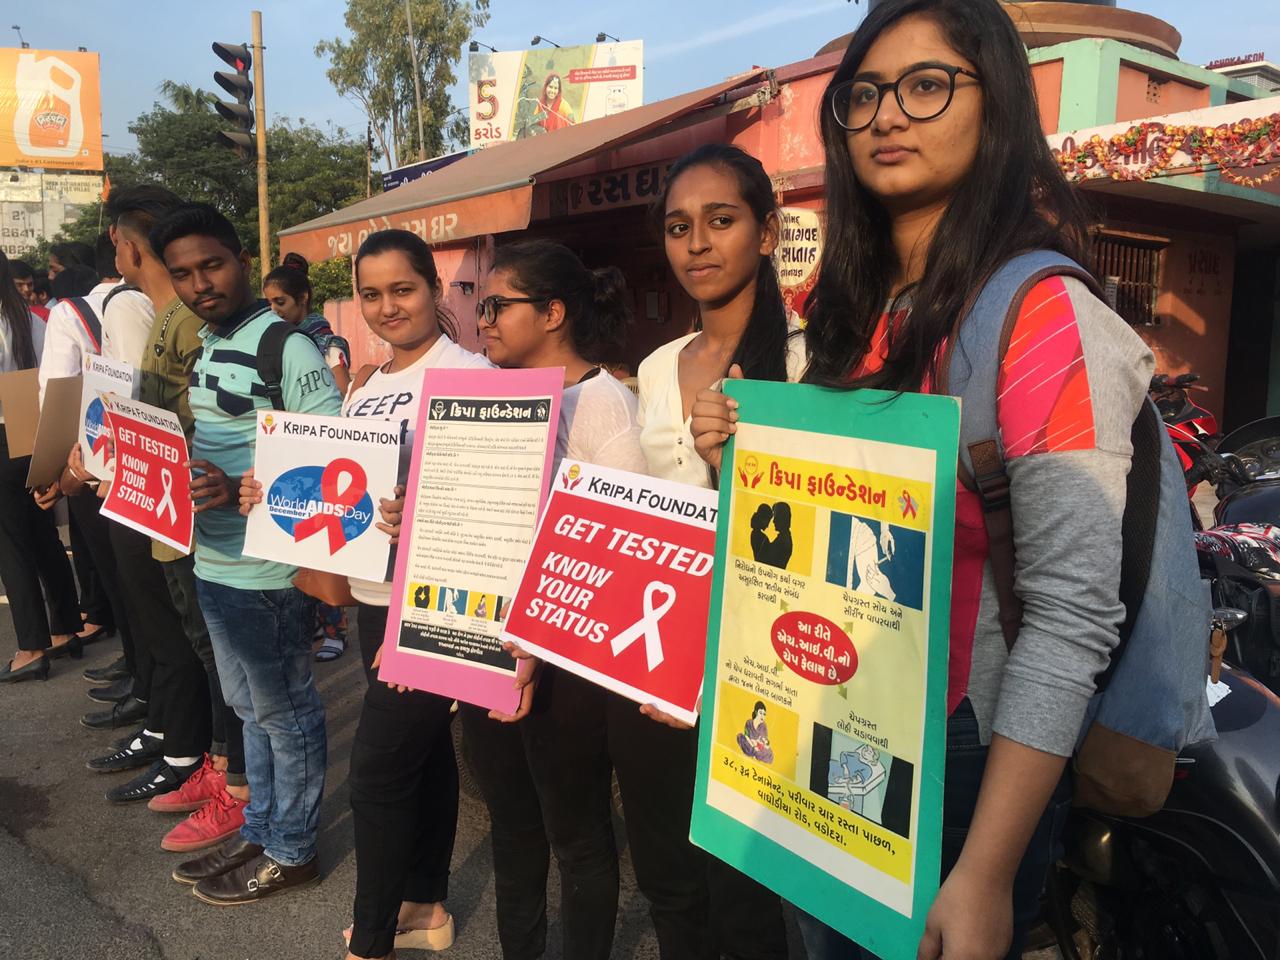 Kripa foundation organise awareness programme on the eve of World Aids Day